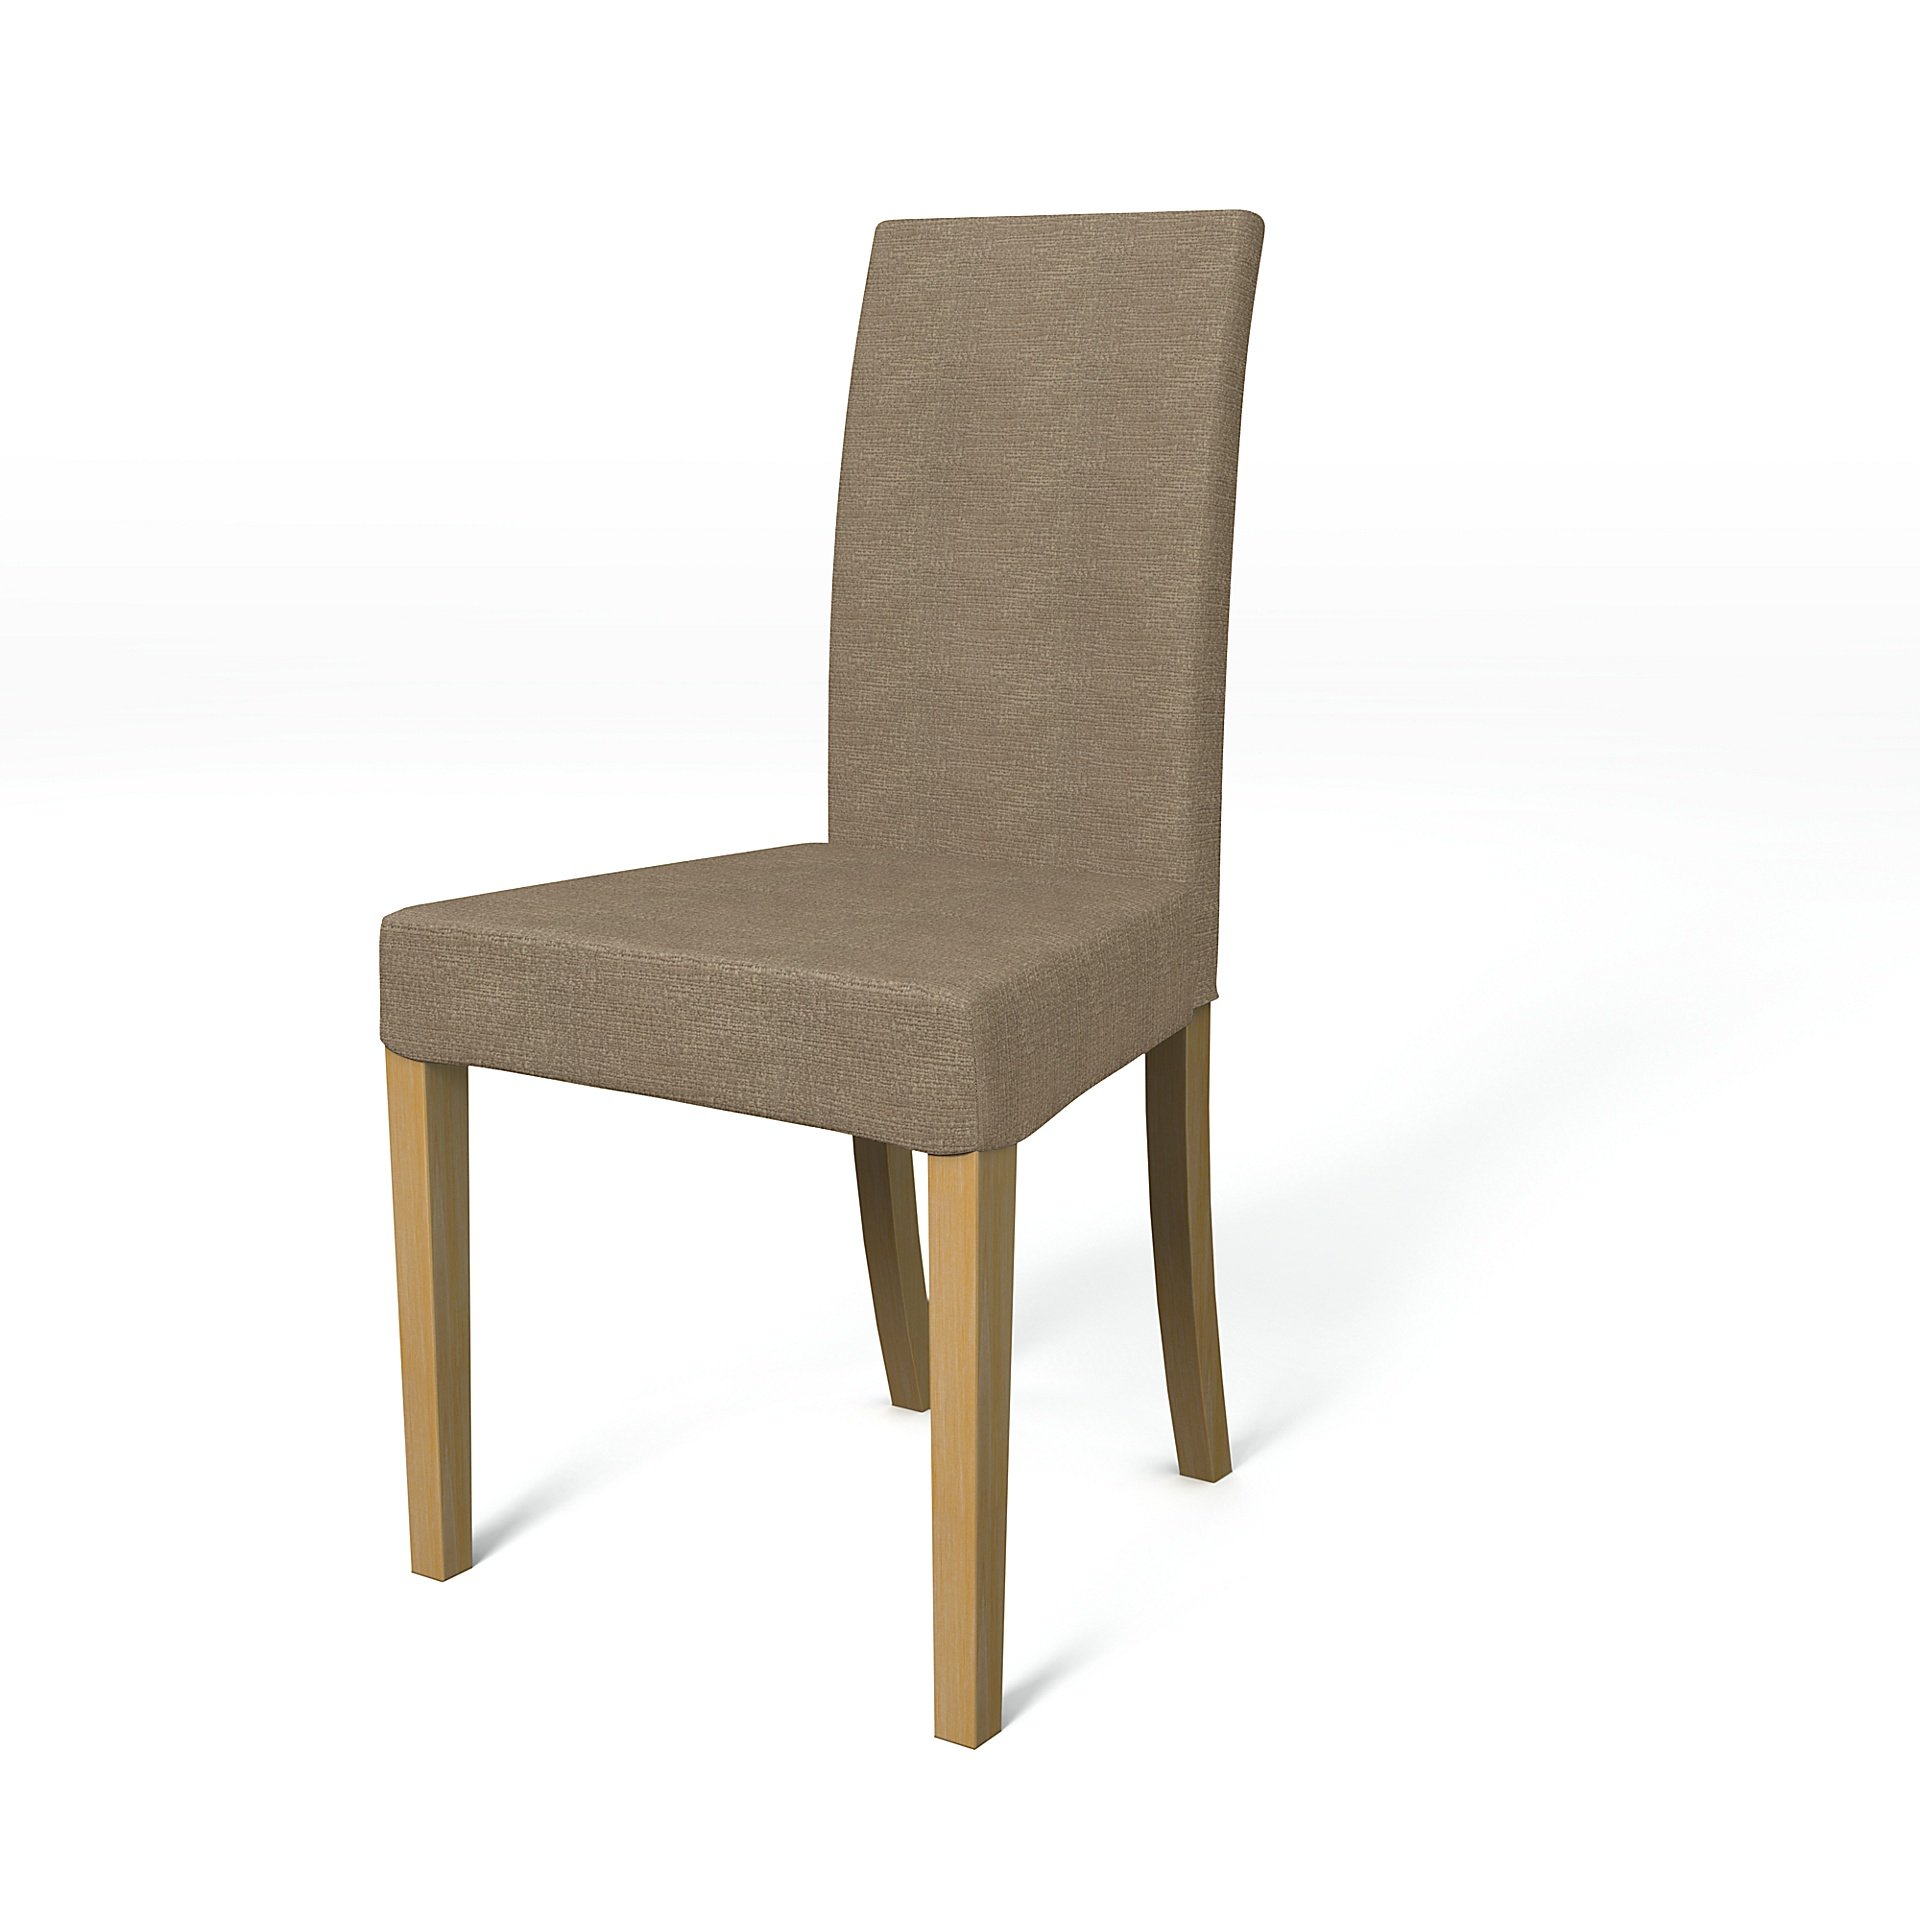 IKEA - Harry Dining Chair Cover, Camel, Boucle & Texture - Bemz